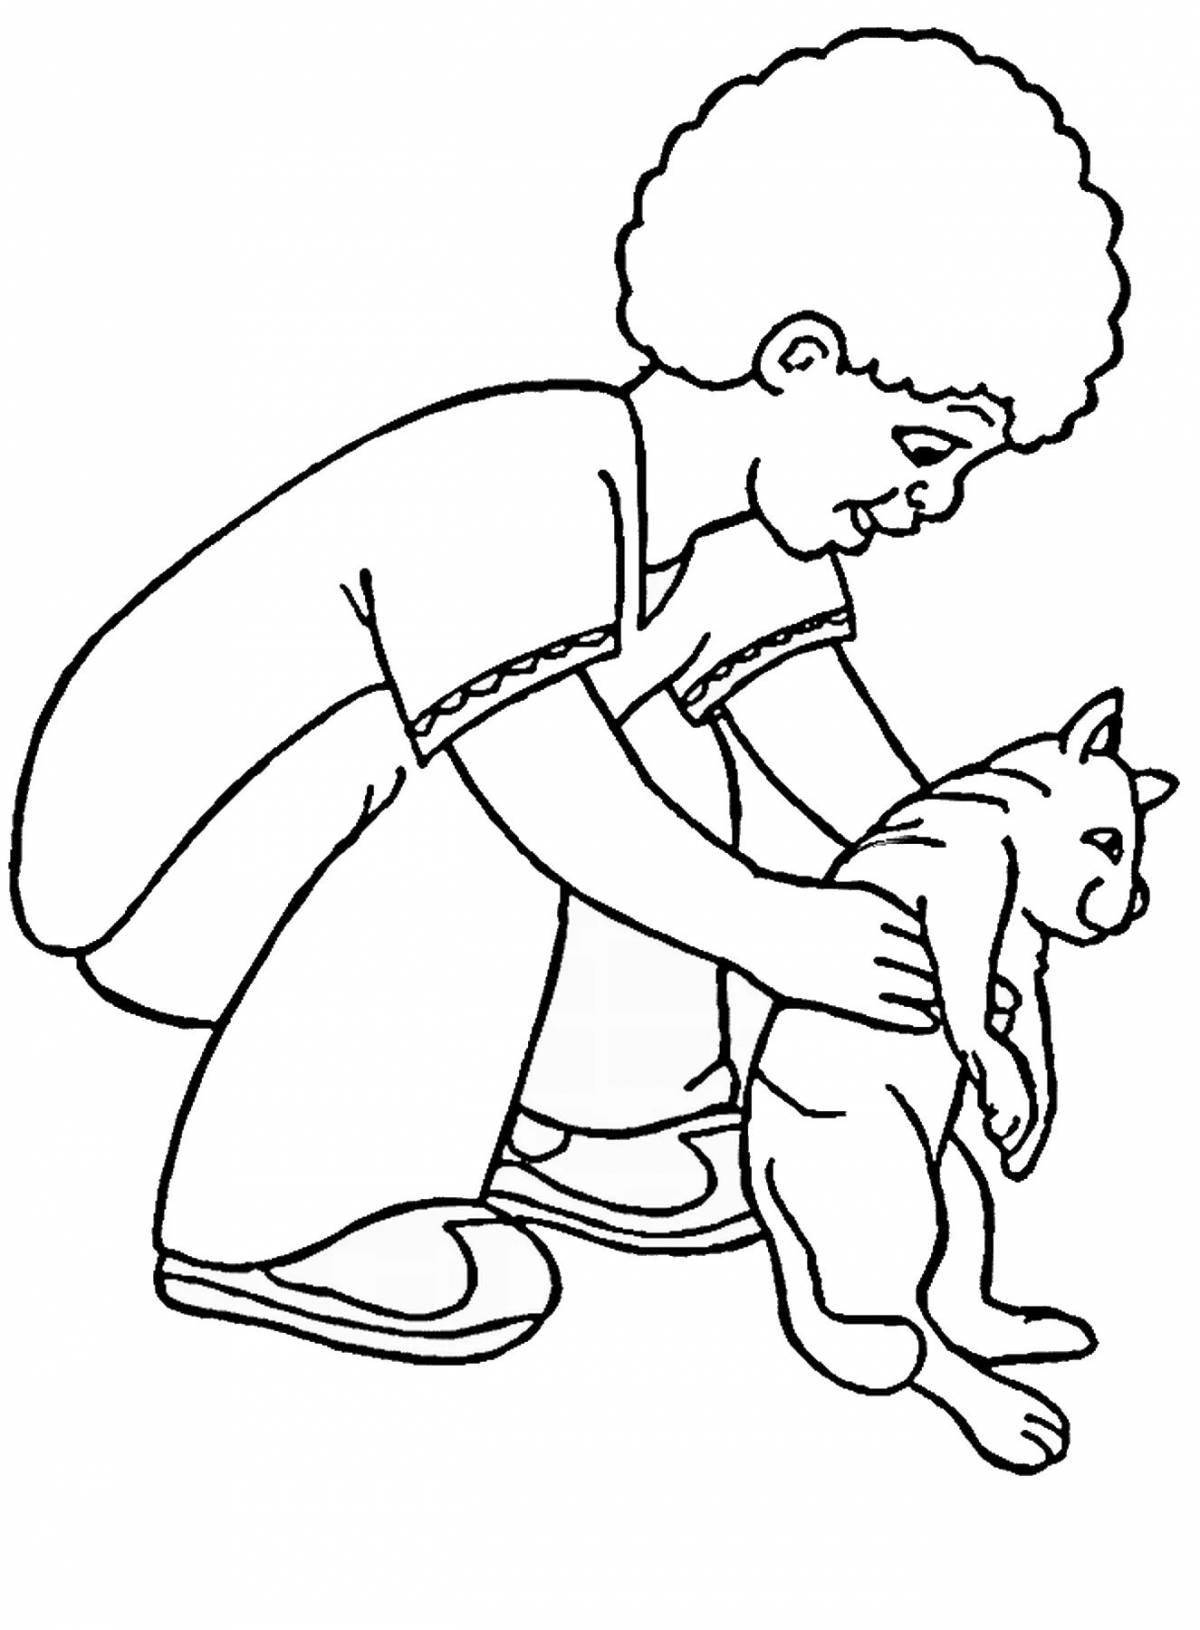 Huggable coloring page kitten fat